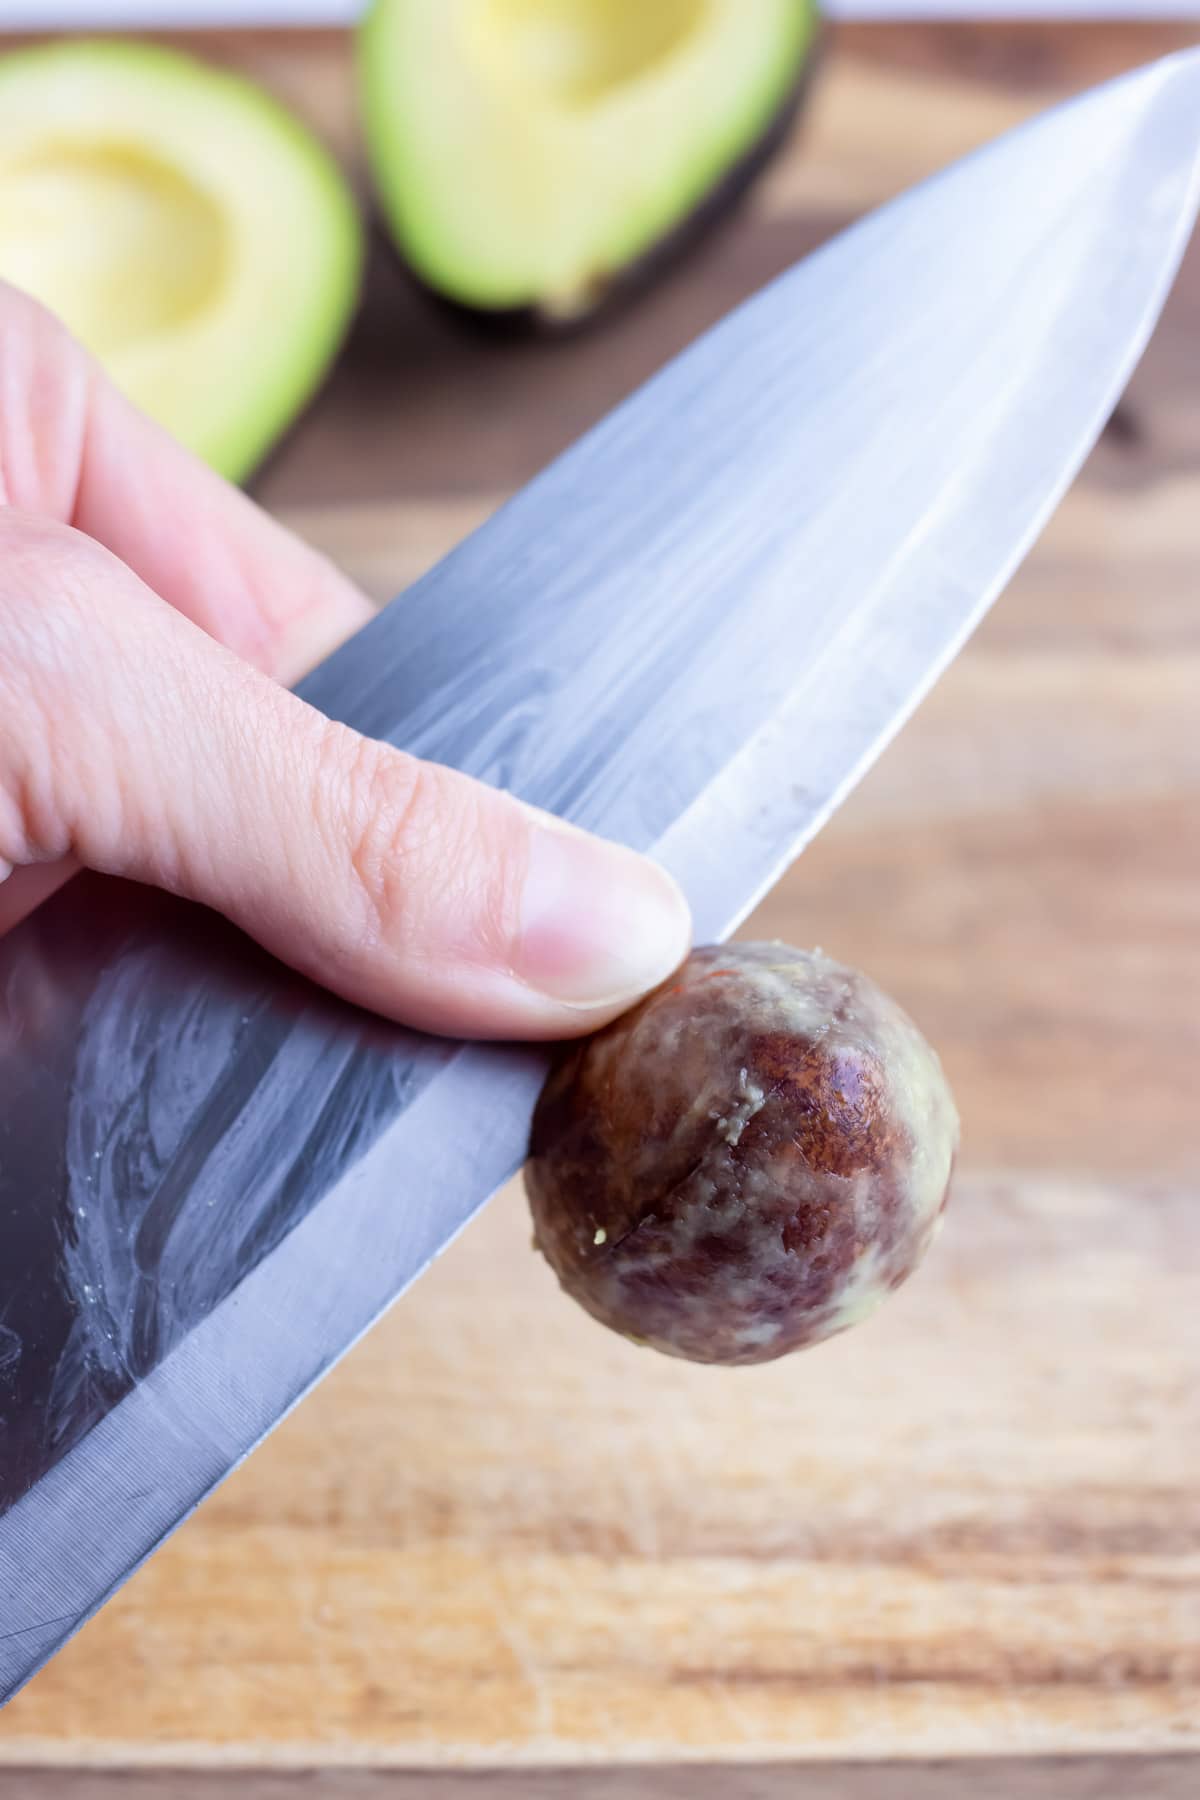 The Only Knife You Should Be Using To Cut Avocados